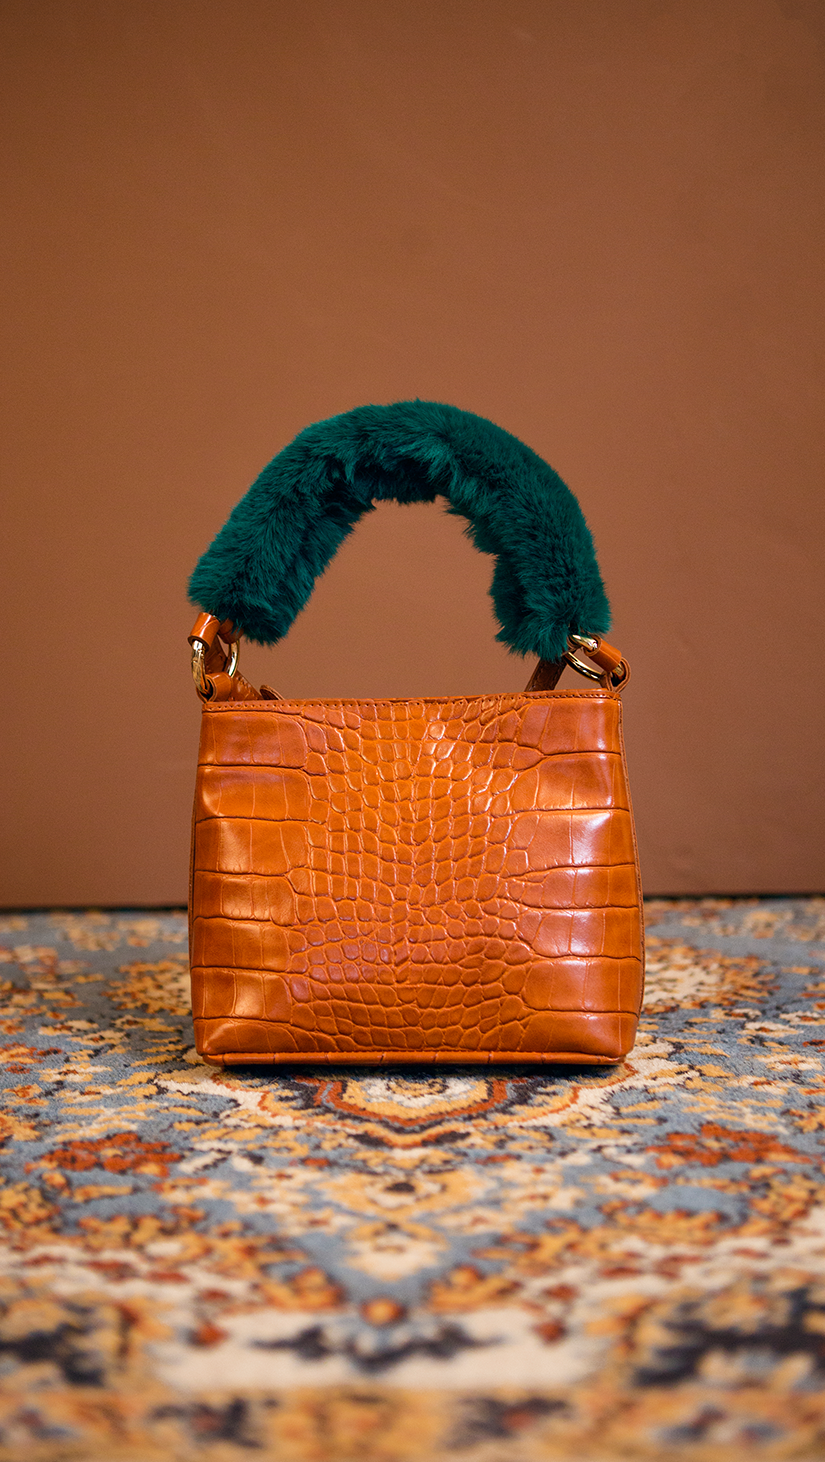 Forziéri bag in brown/deep green. Fur handle, front flap magnetic snap tab closure. Interior pockets. Detachable shoulder straps. Structured bottom.